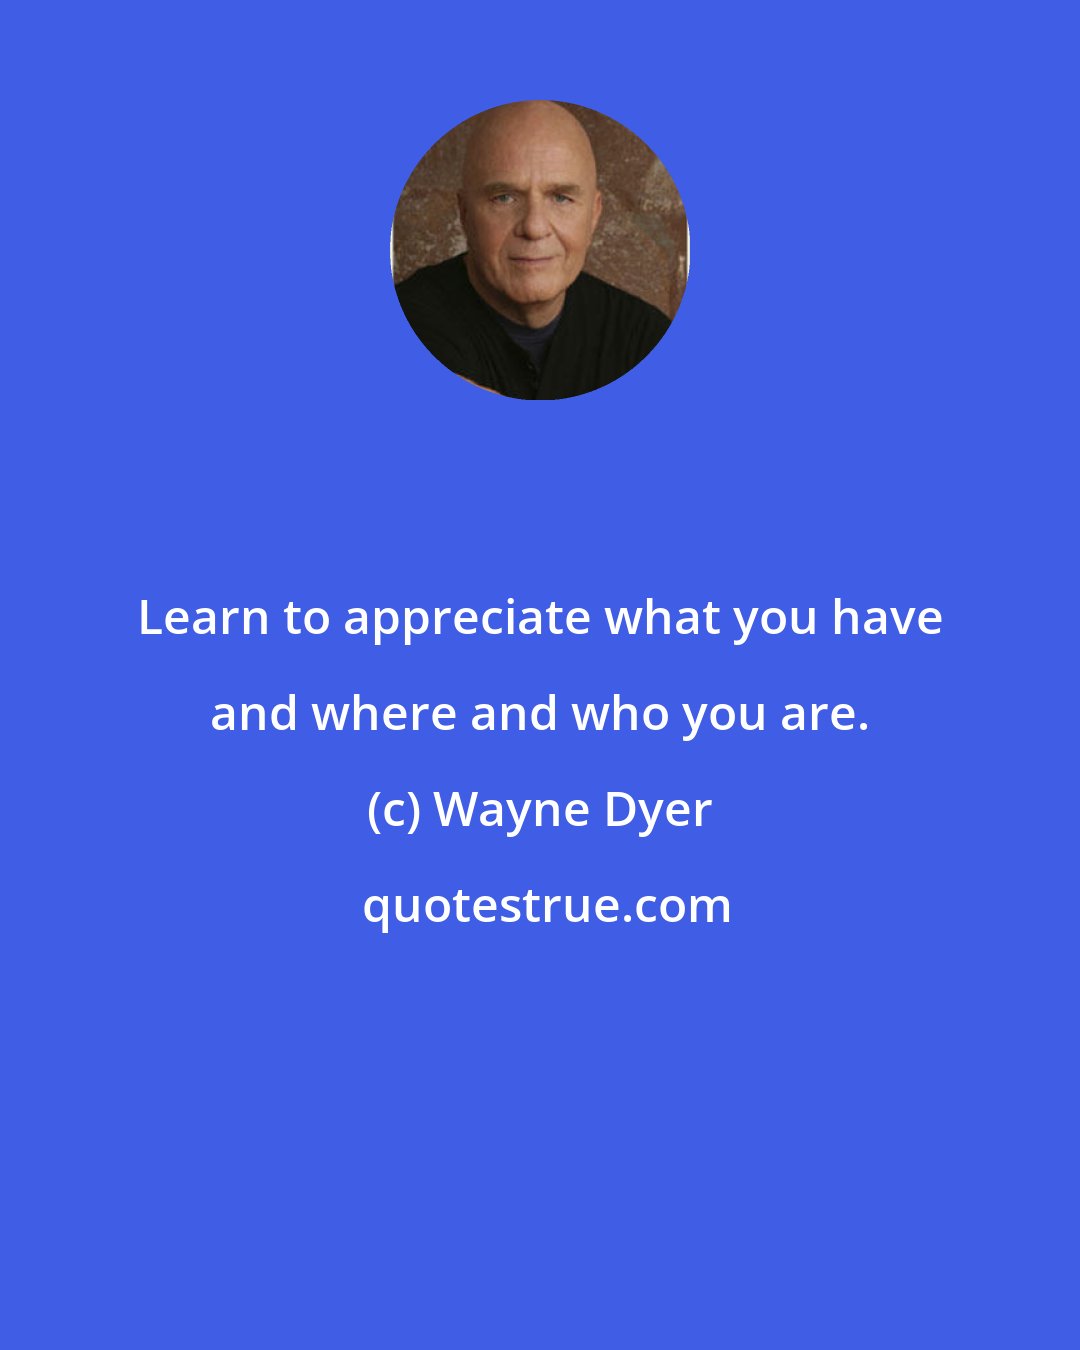 Wayne Dyer: Learn to appreciate what you have and where and who you are.